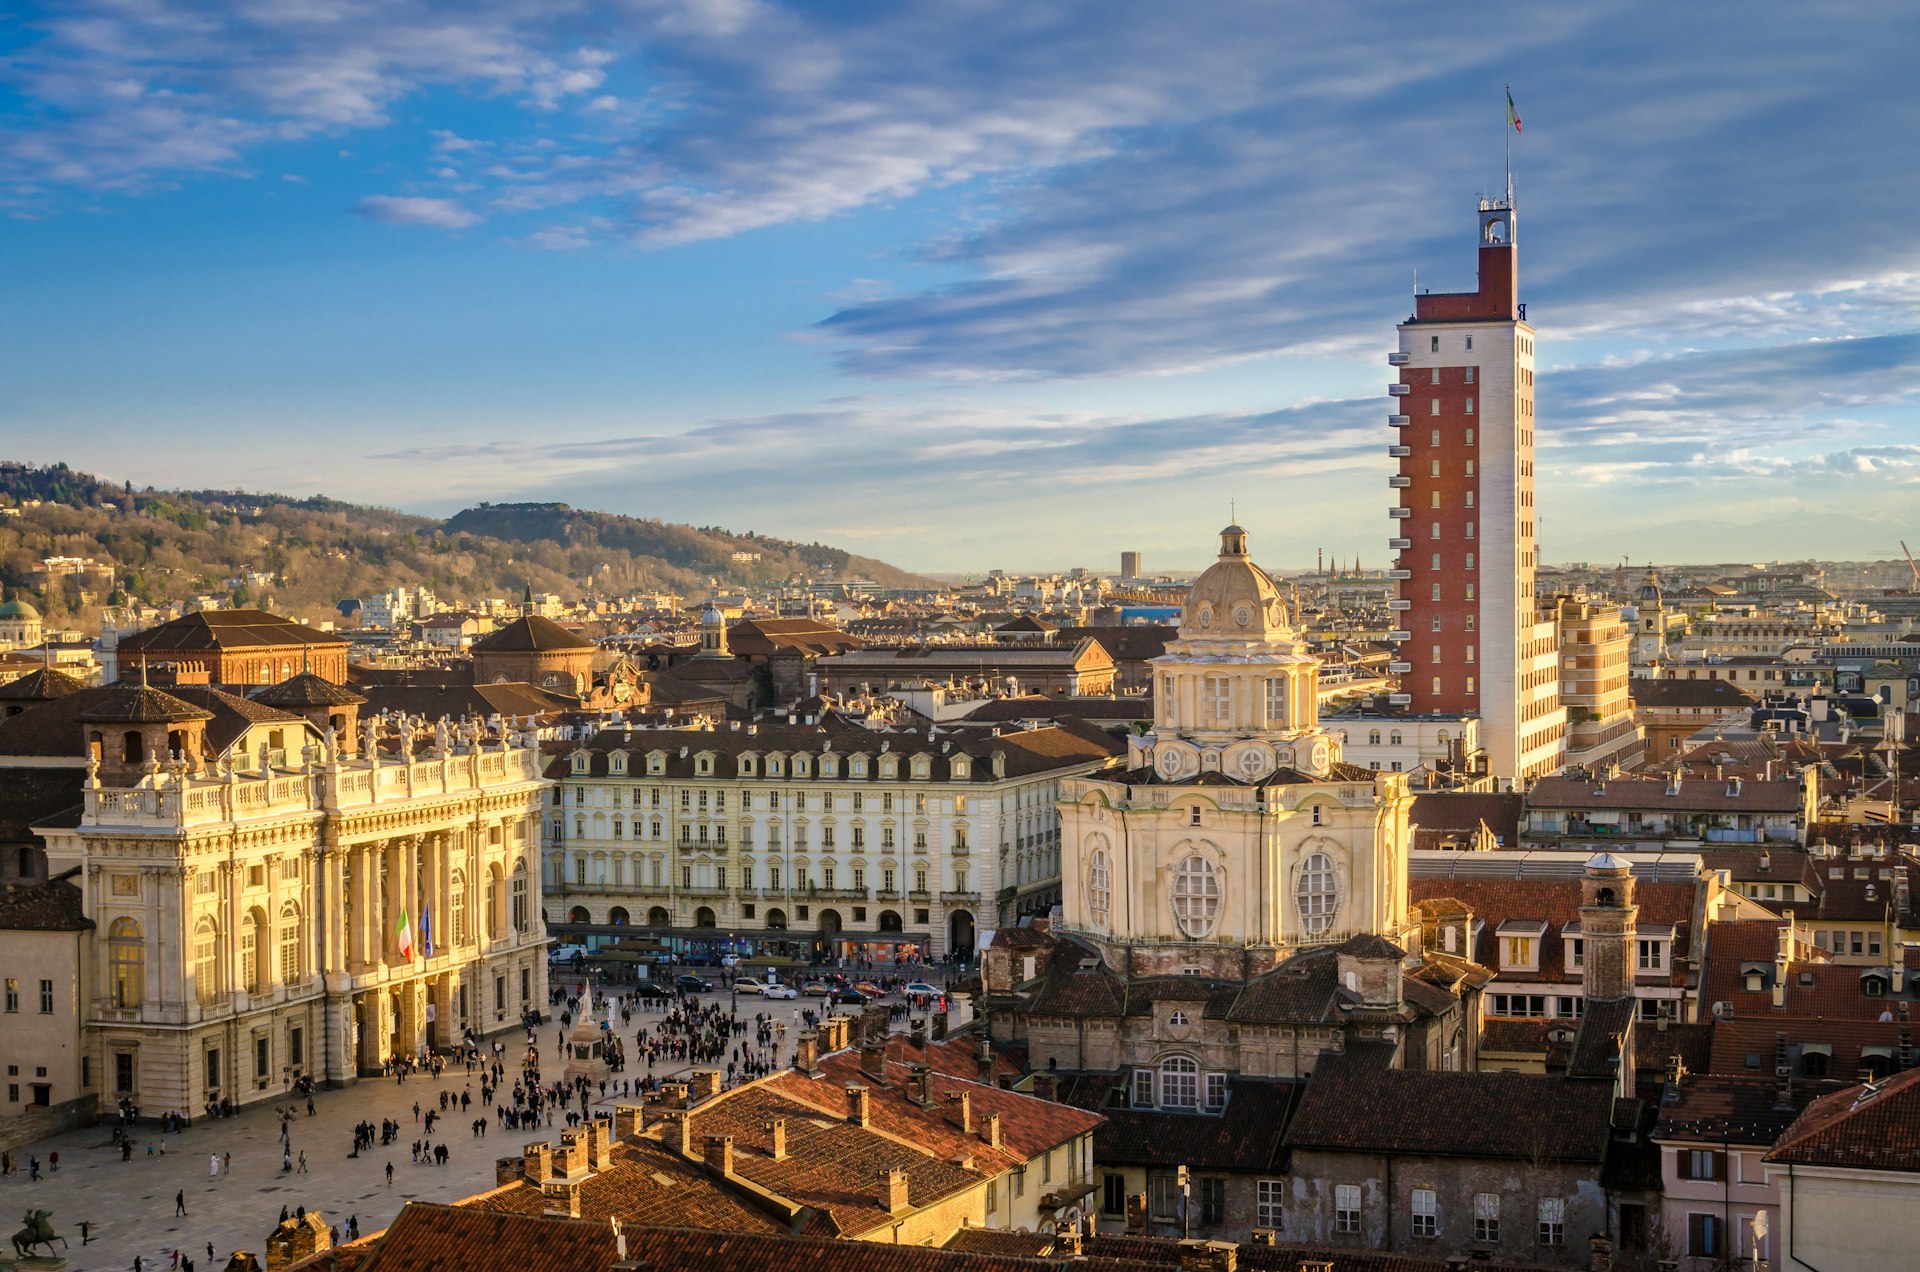 An elevated view of Piazza Castello in Turin at sunset